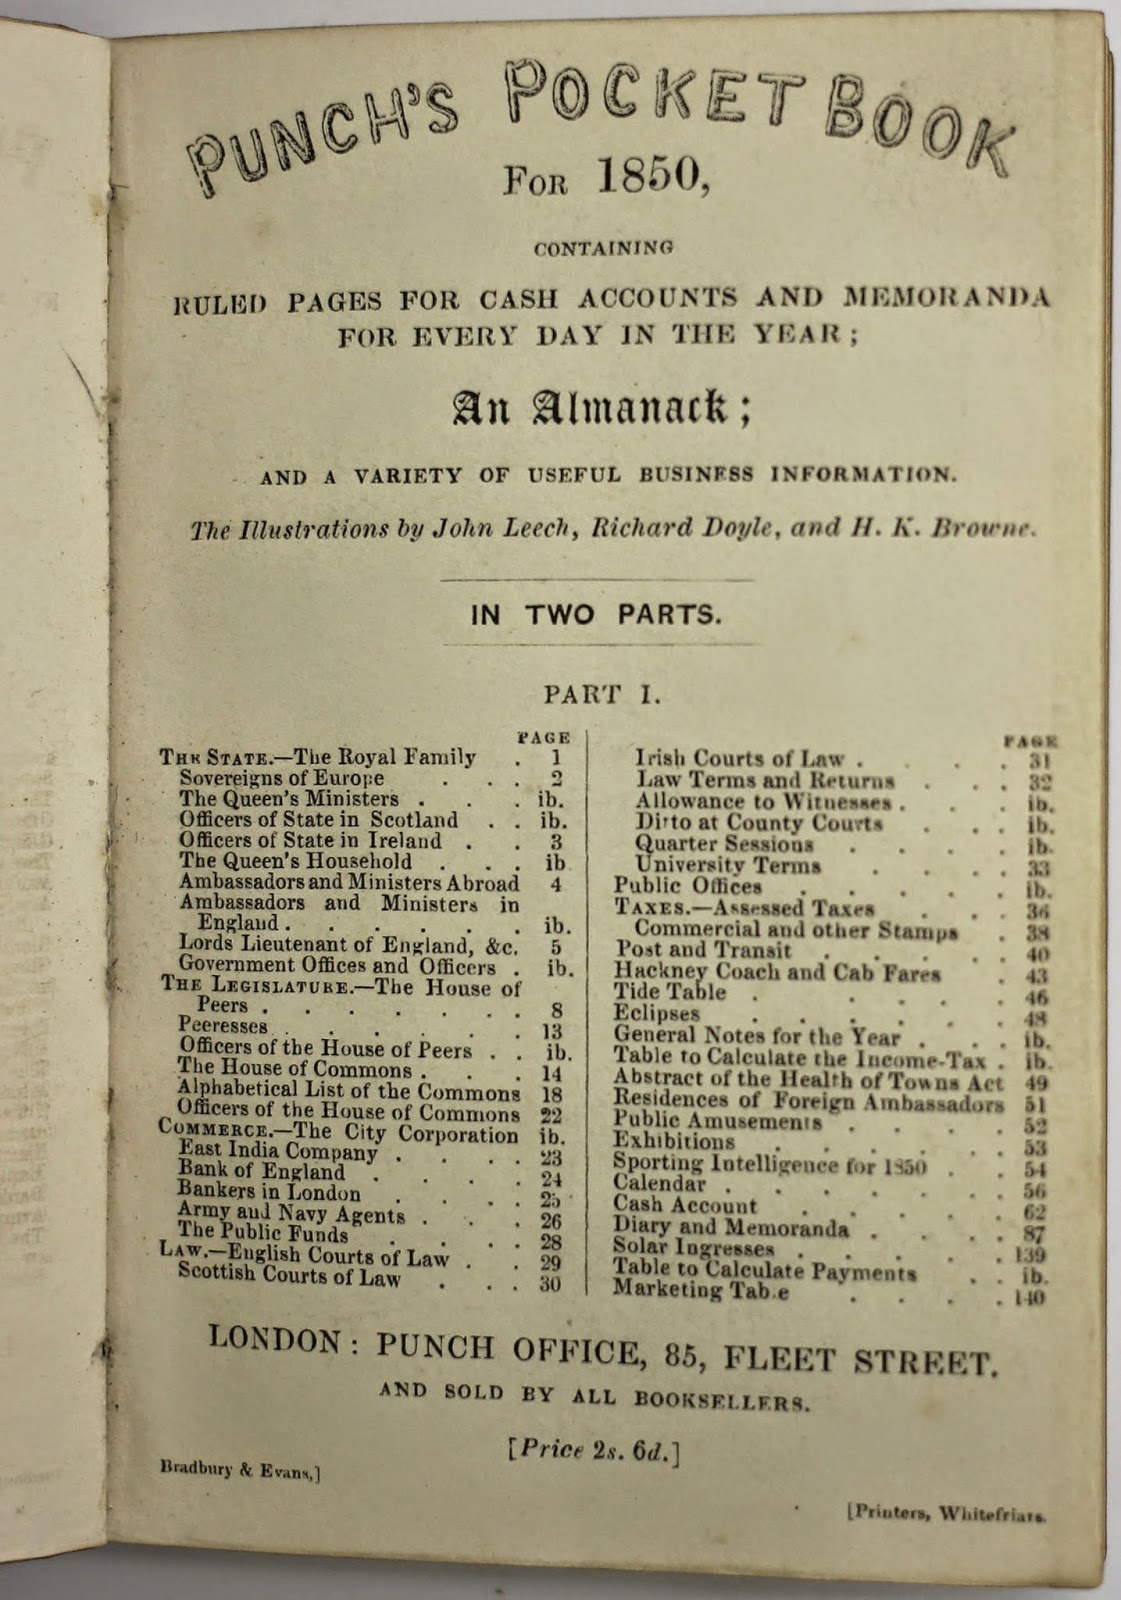 1850 Punch's Pocket Book table of contents for Part I, which includes pages for cash accounts and memoranda, an almanac, and other business information